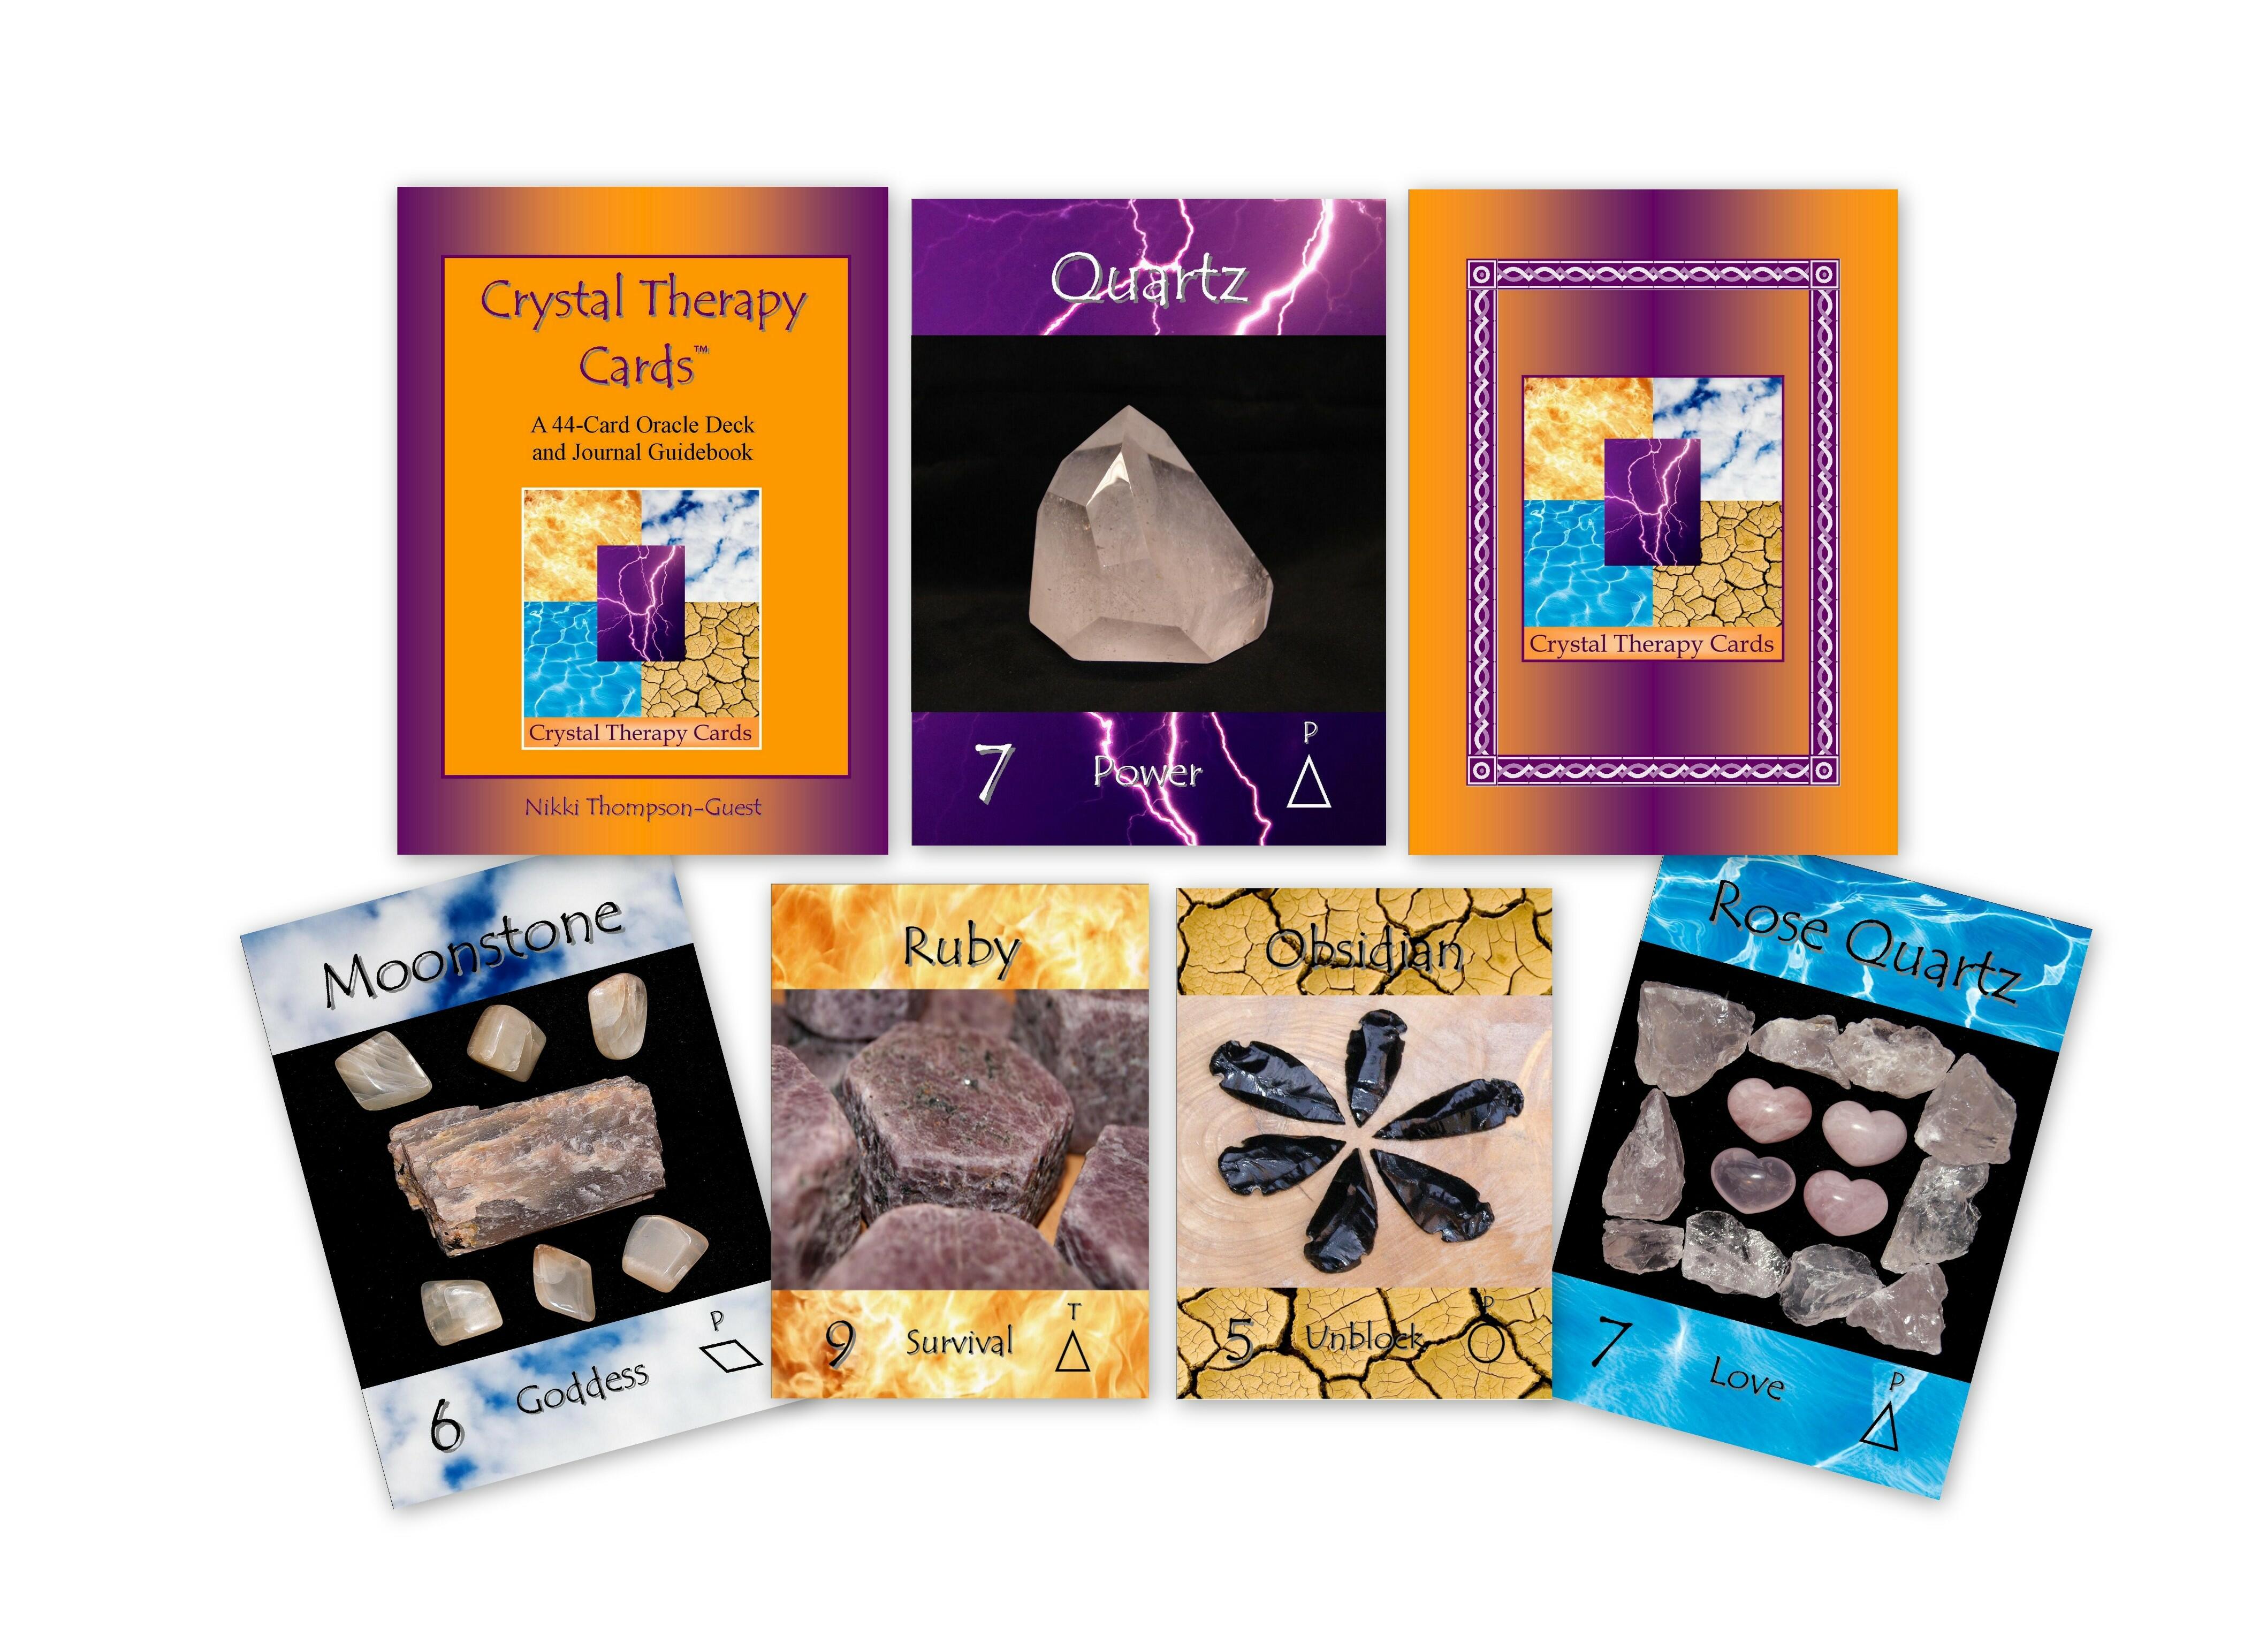 Crystal Therapy Cards